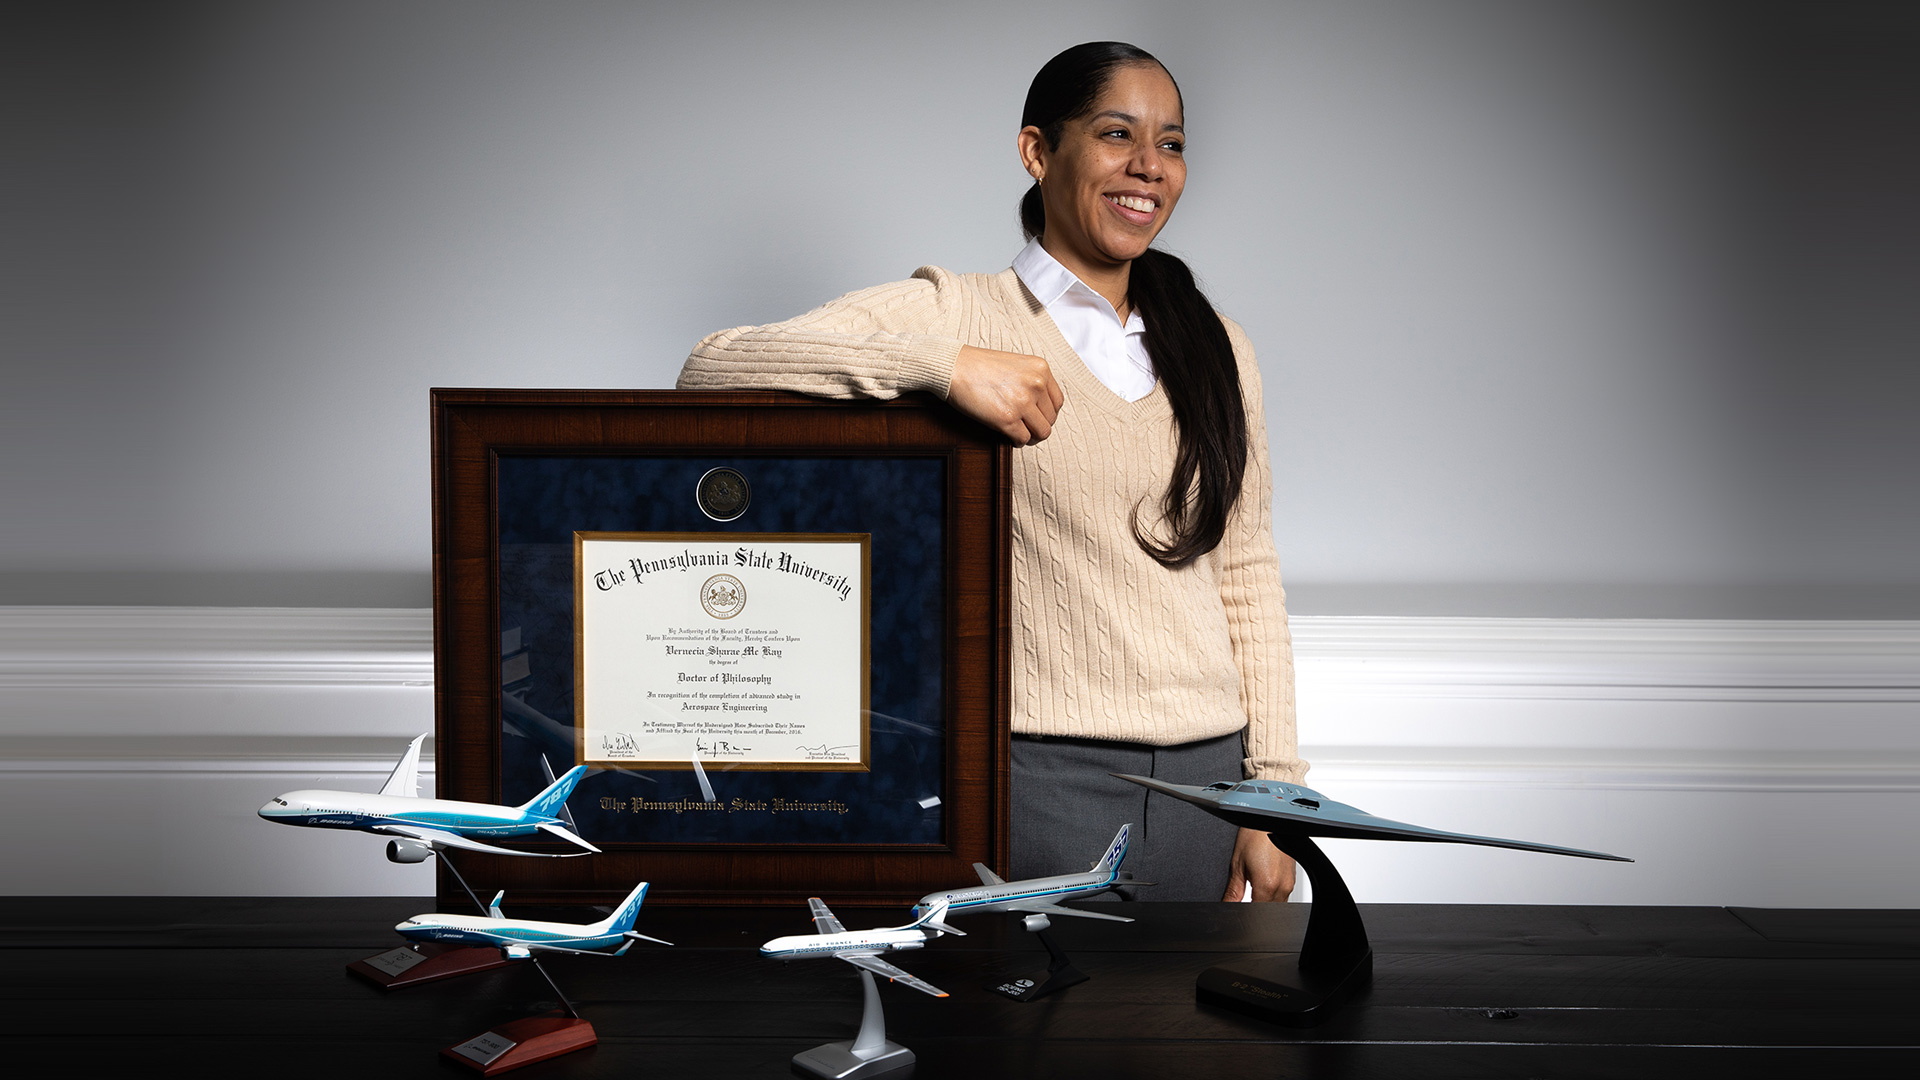 Sharaé Meredith poses with her doctoral diploma from Penn State.